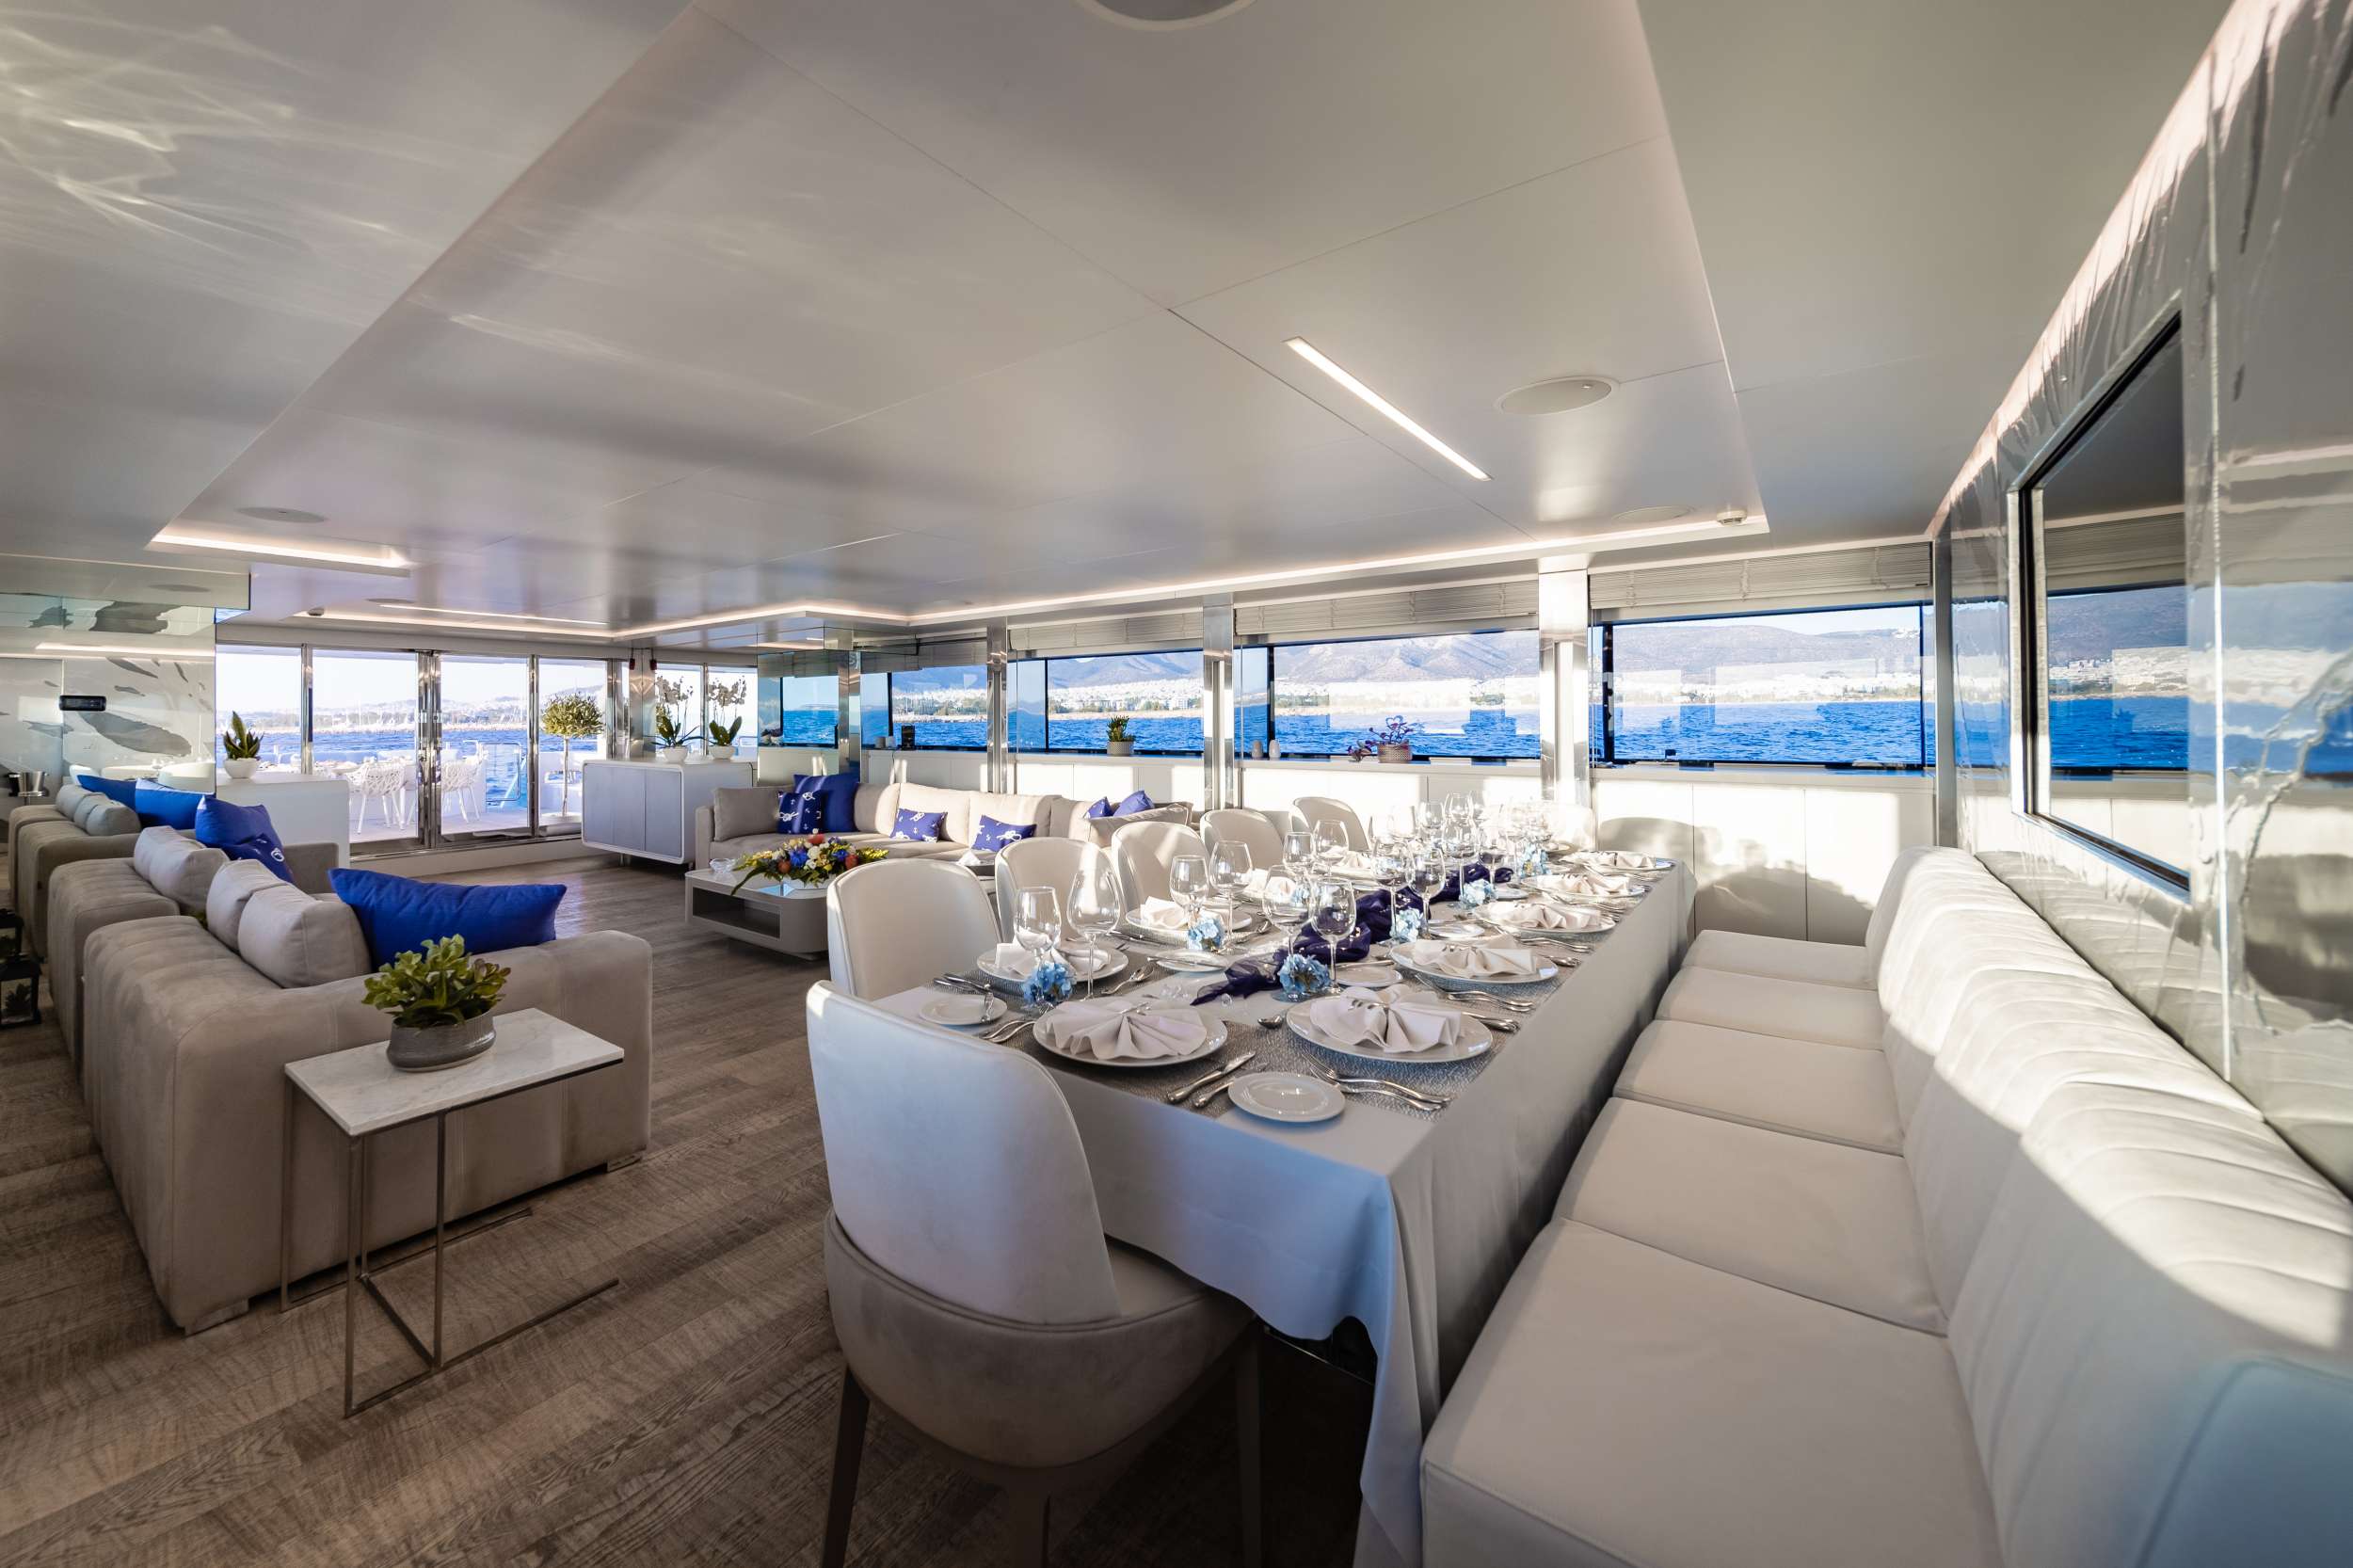 SEA WOLF Yacht Charter - Dining